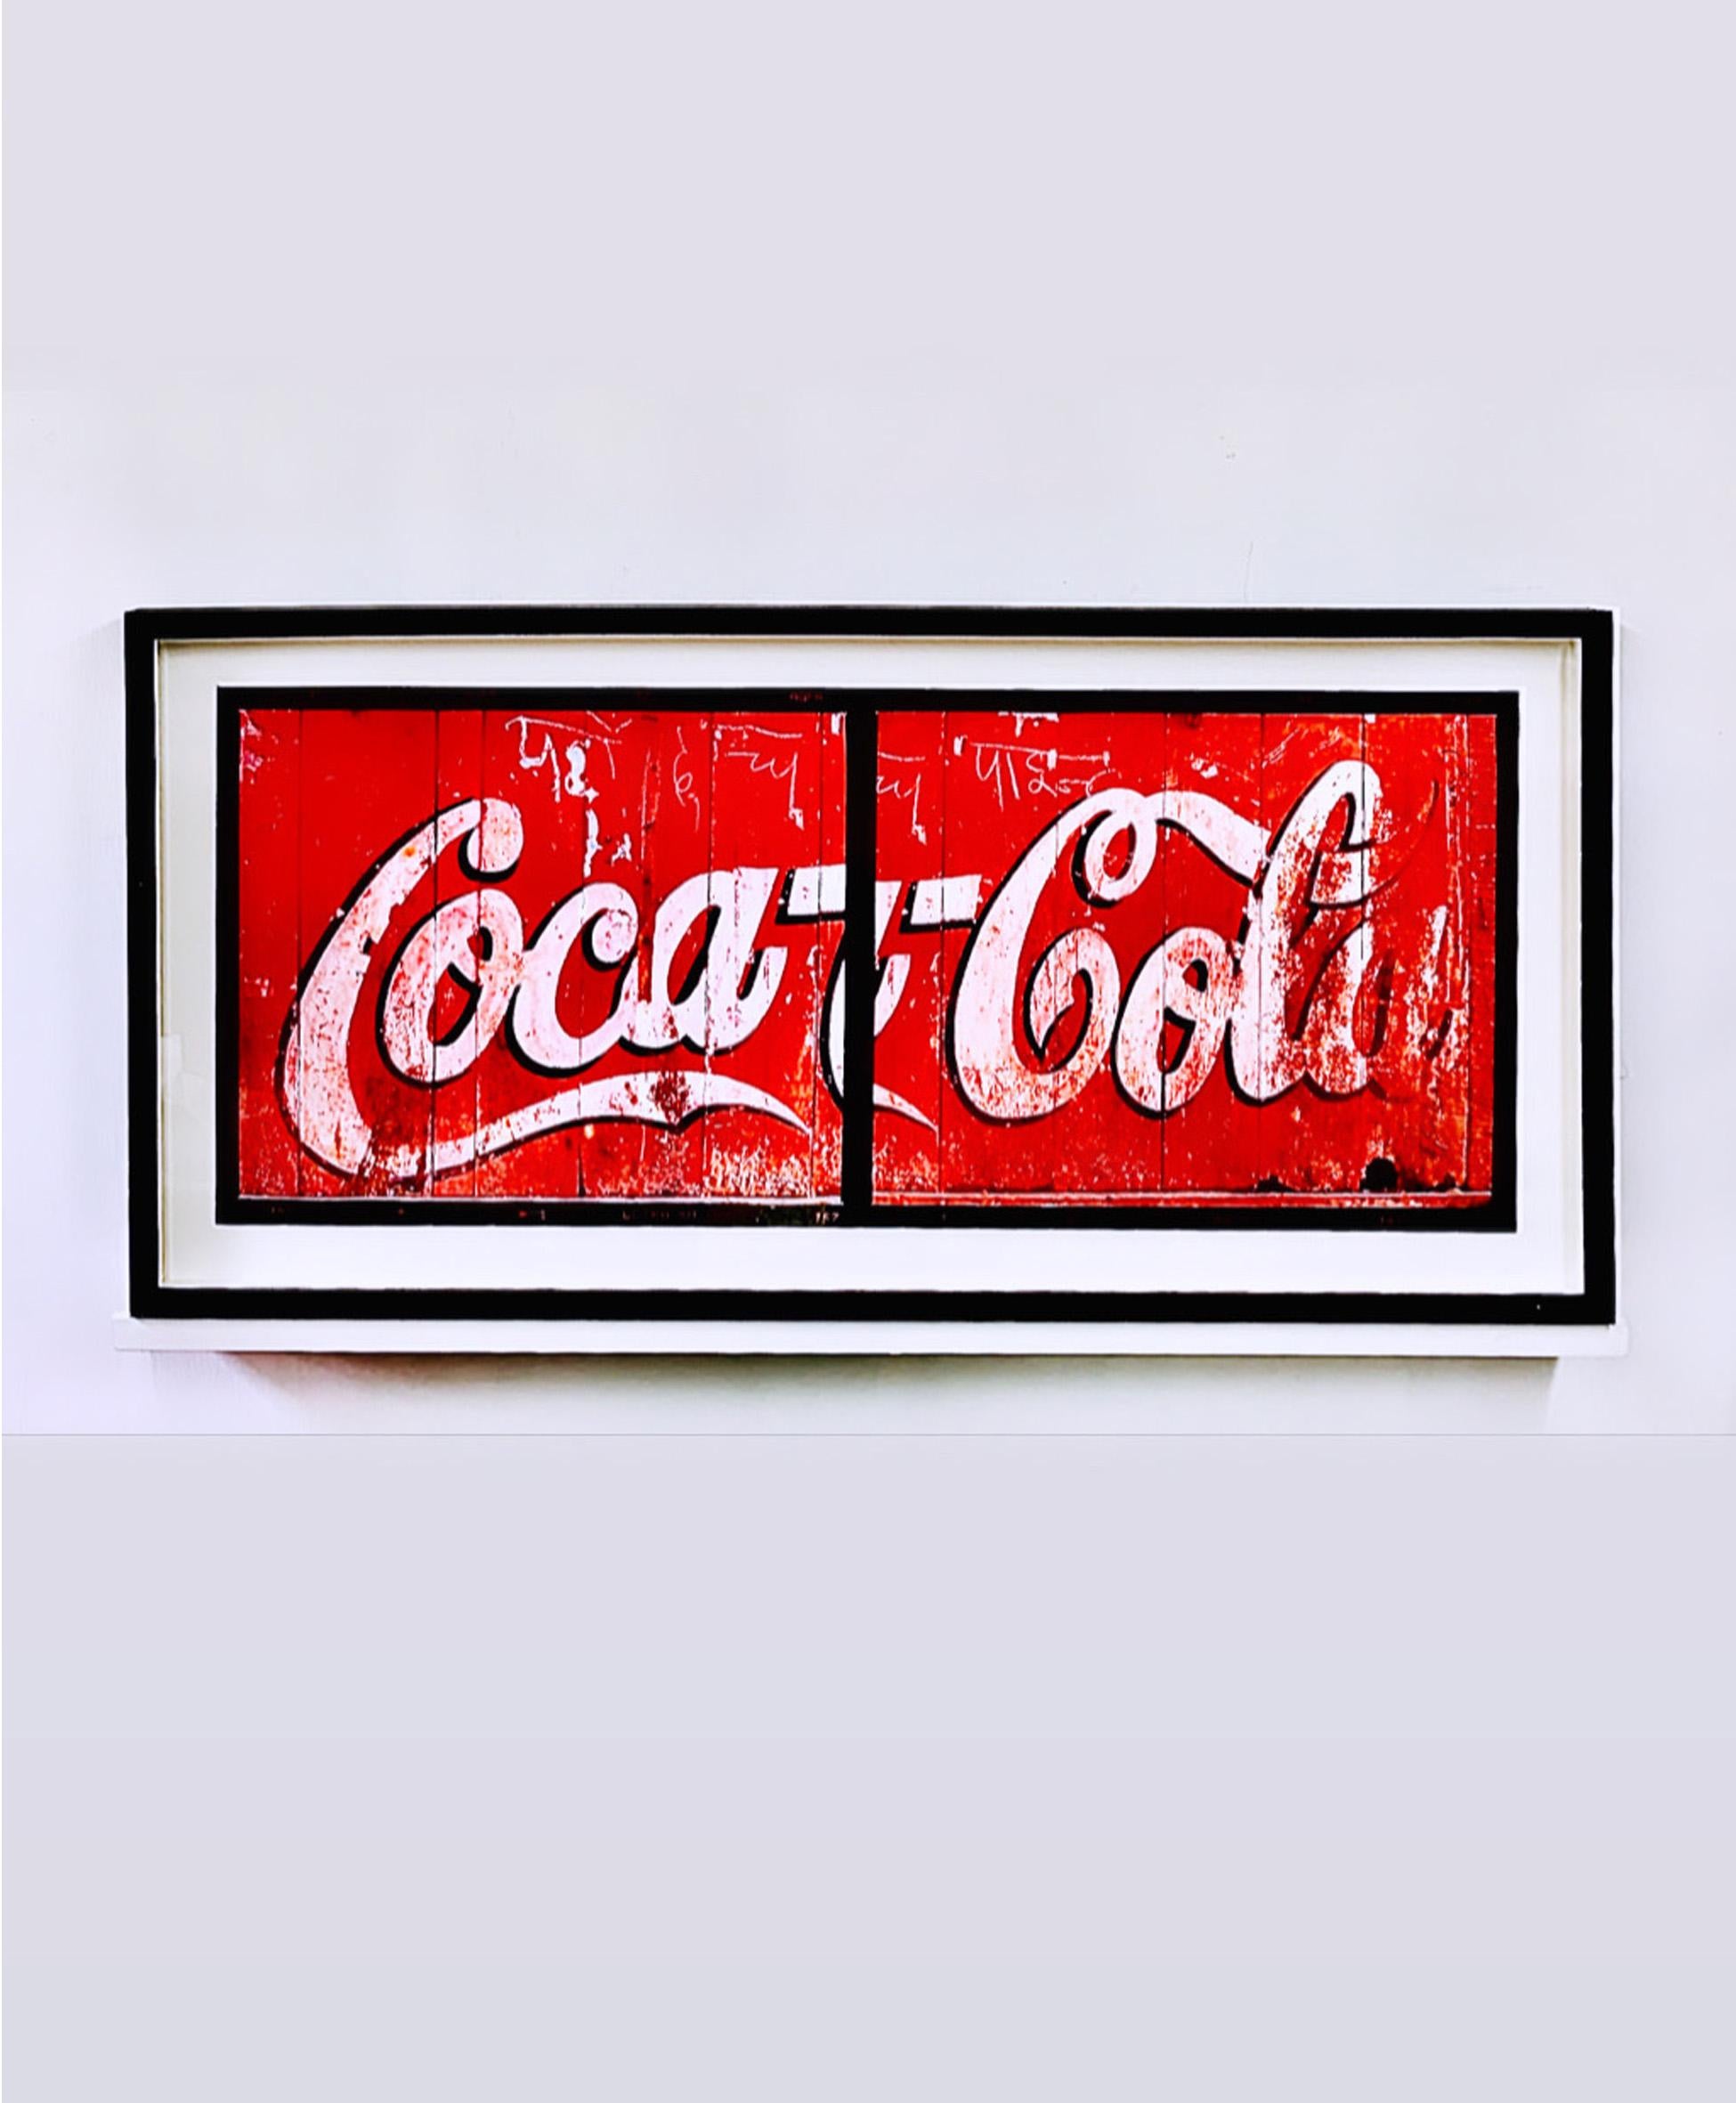 Indian Coca-Cola, Darjeeling, West Bengal - Contemporary Color Photography - Print by Richard Heeps